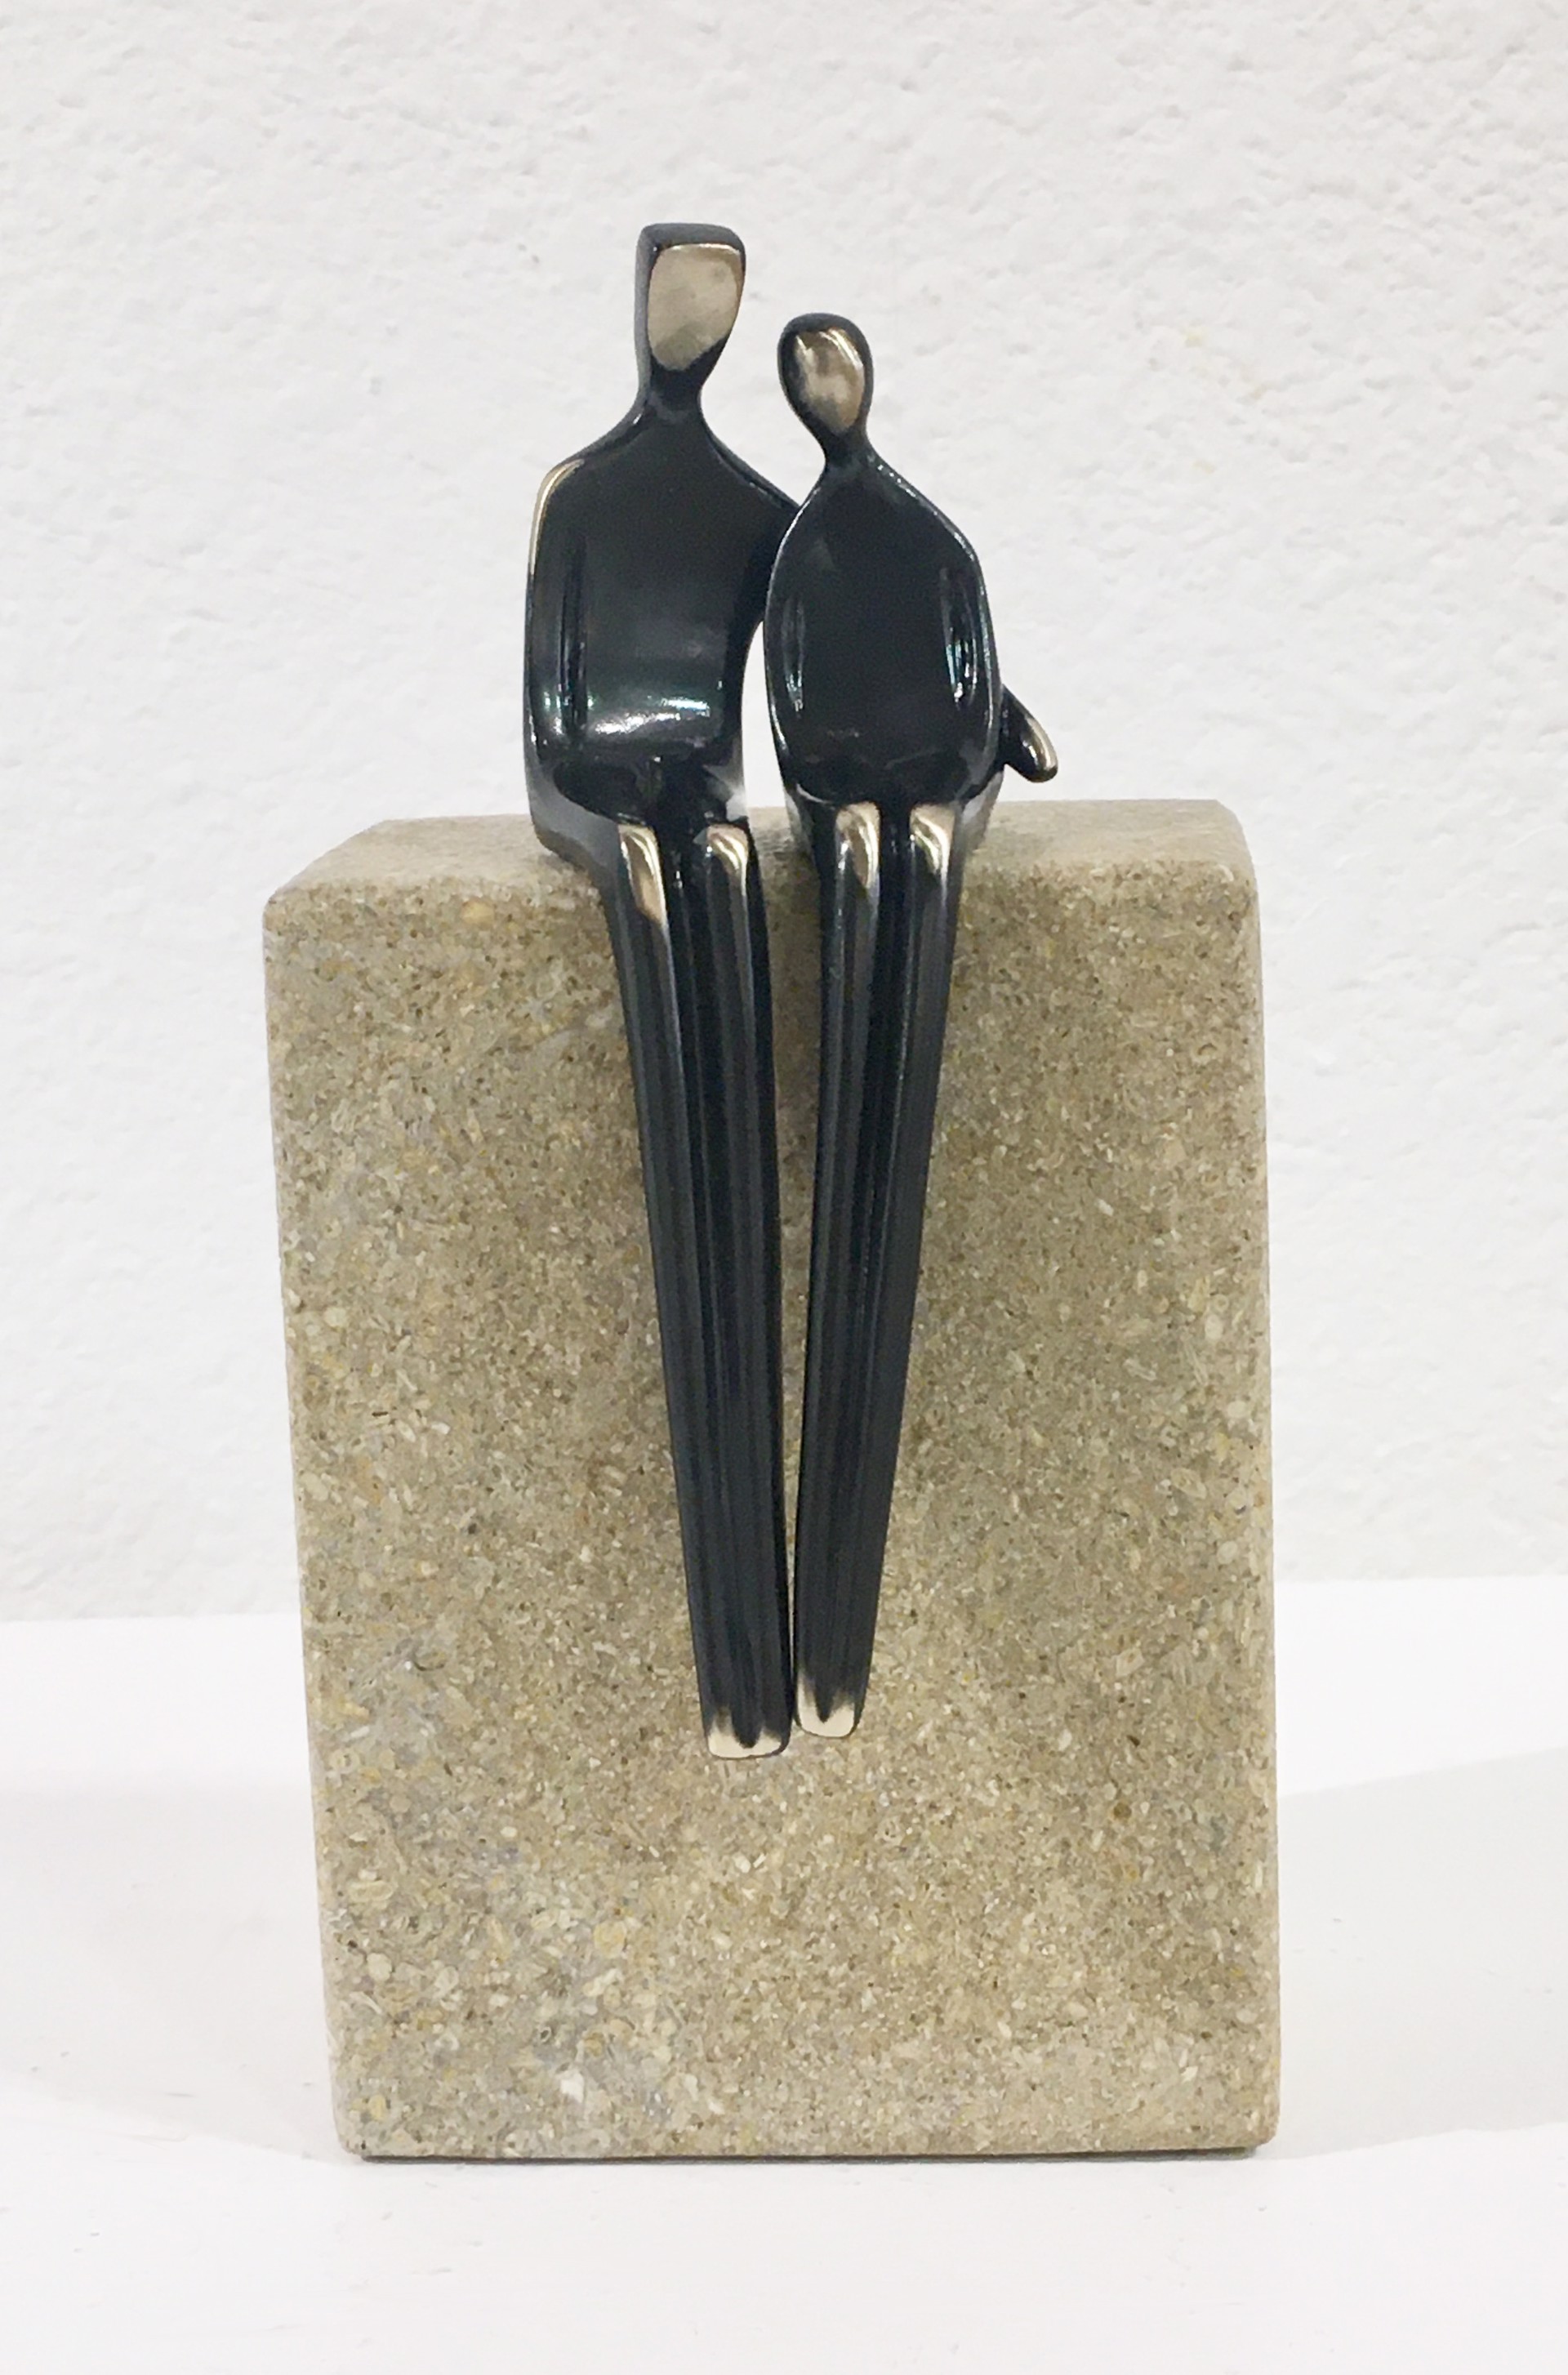 5" Couple (arm around) with Base by YENNY COCQ